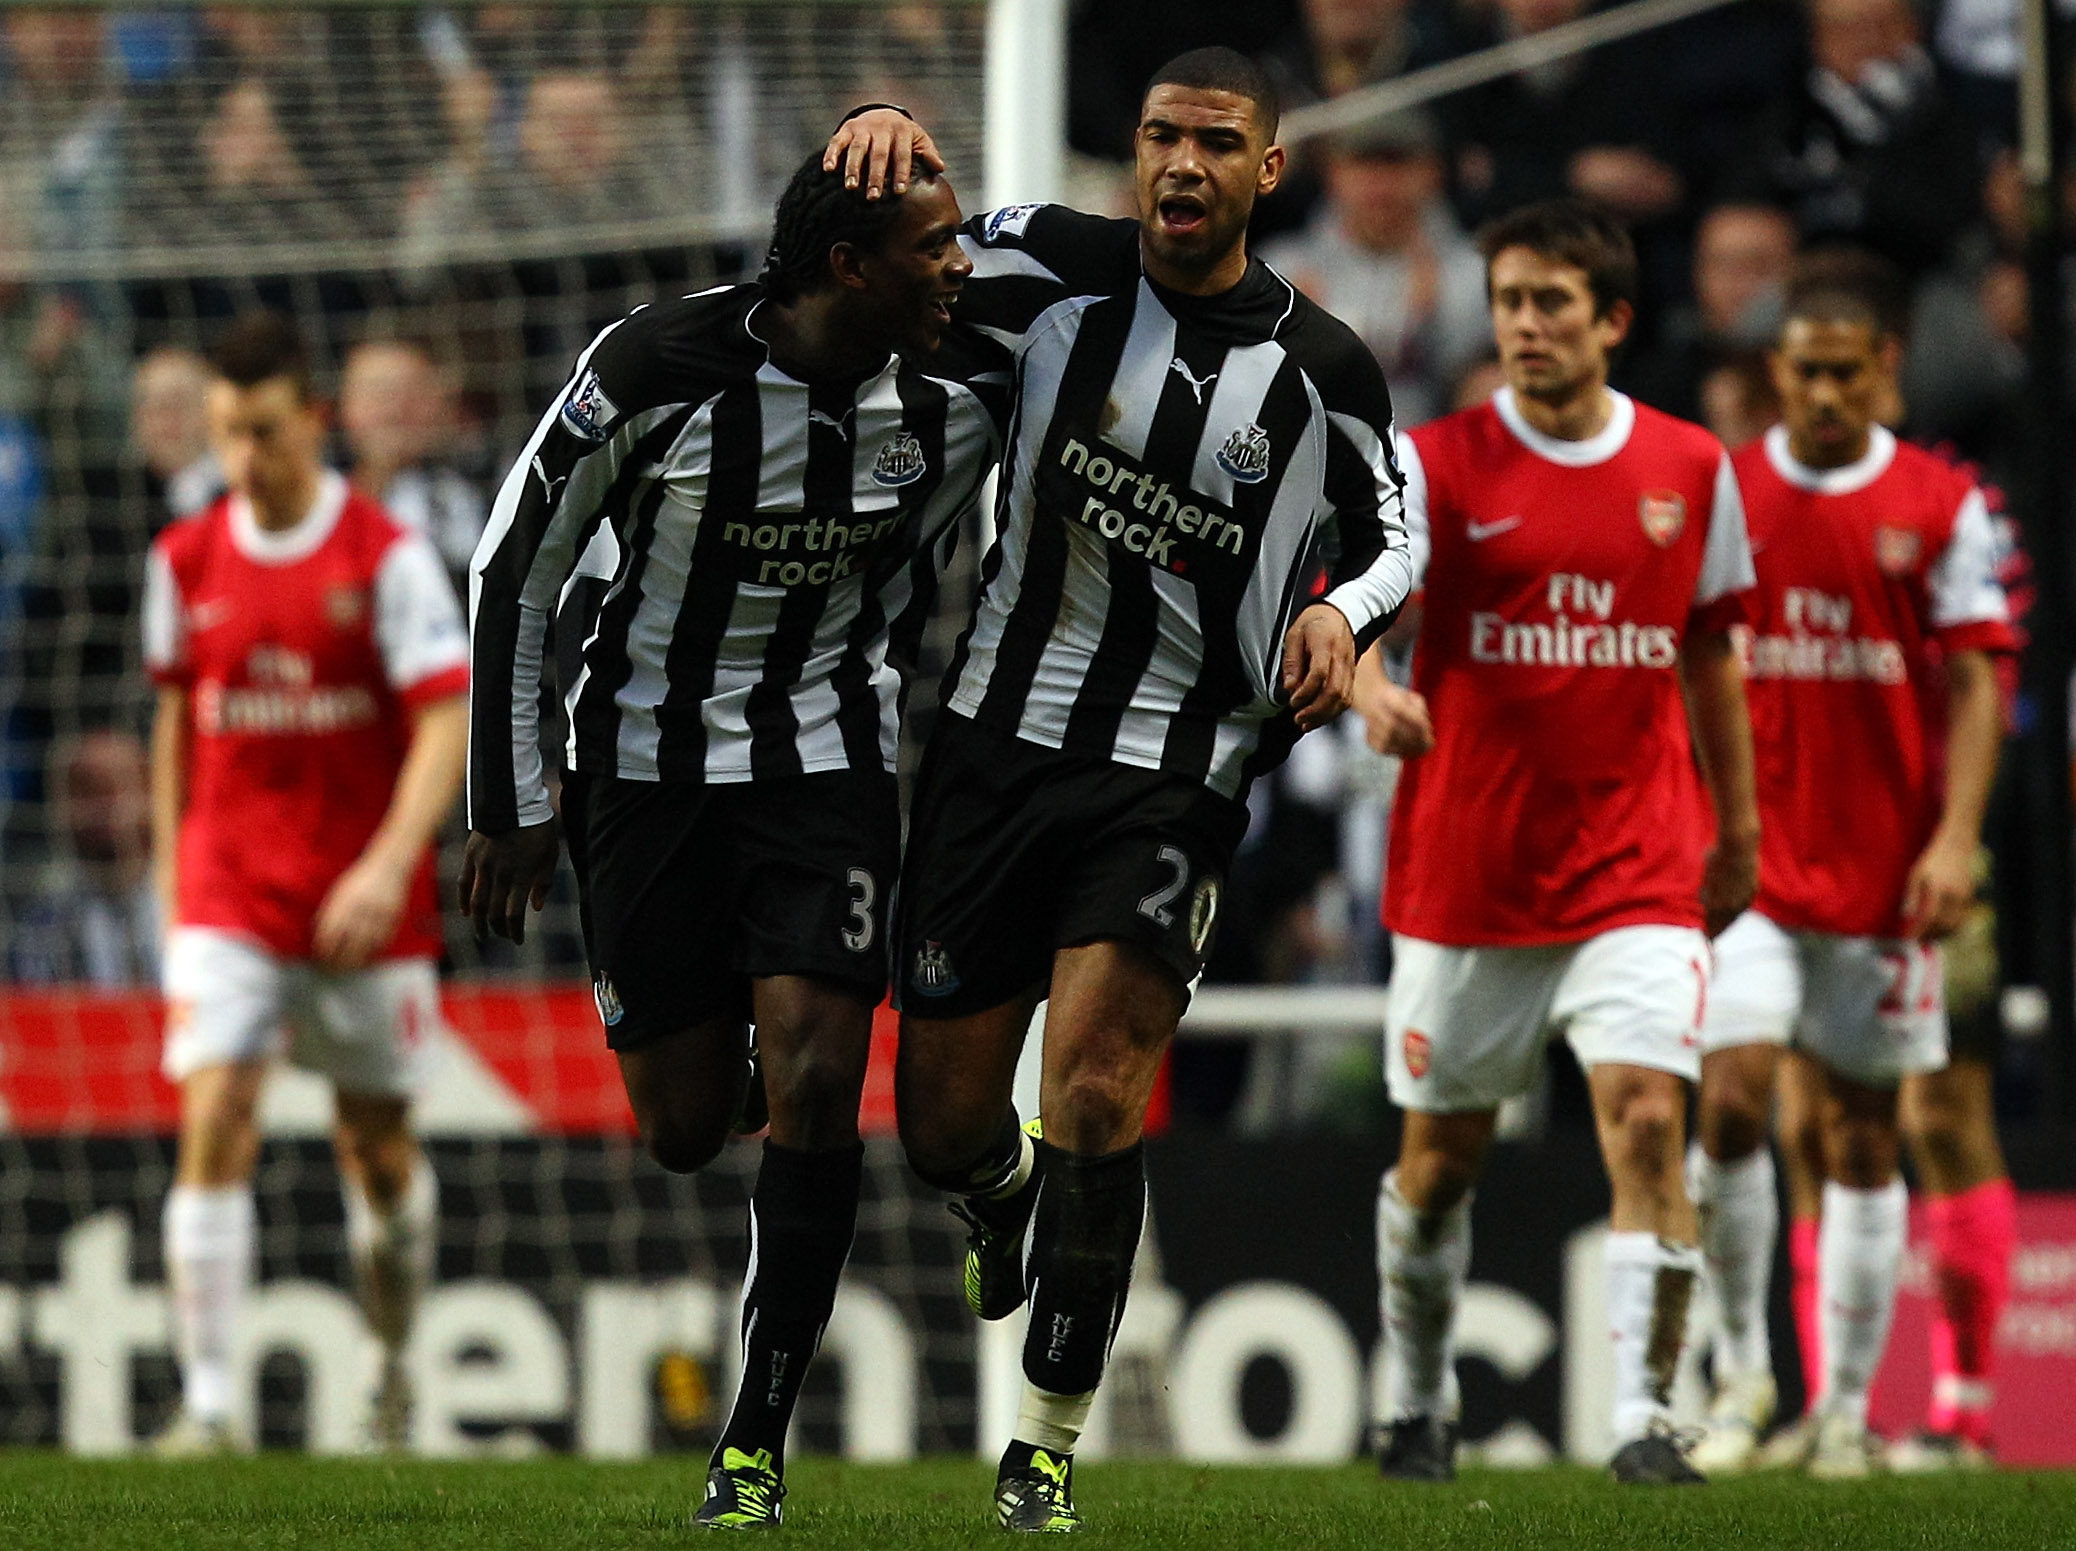 NEWCASTLE UPON TYNE, ENGLAND - FEBRUARY 05:  Leon Best celebrates scoring the second goal for Newcastle during the Barclays Premier League match between Newcastle United and Arsenal at St James' Park on February 5, 2011 in Newcastle upon Tyne, England.  (